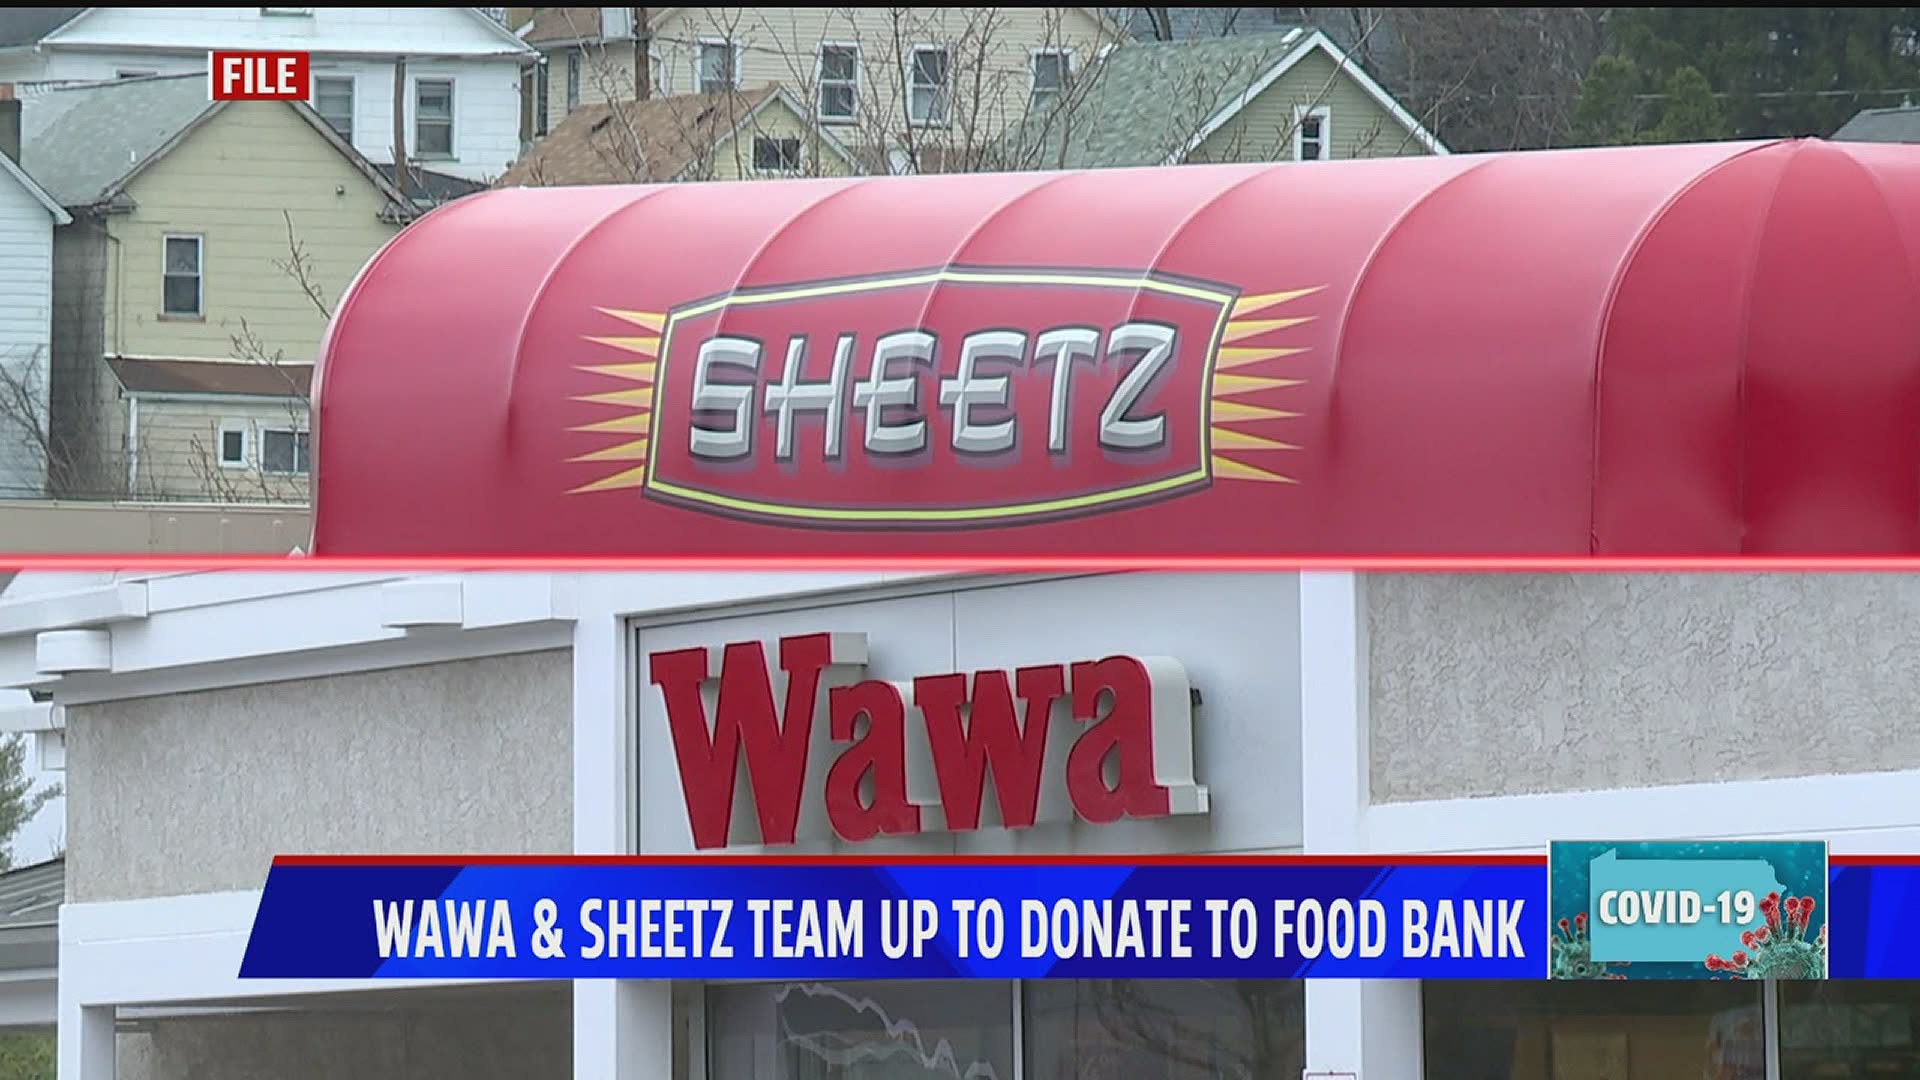 The Pennsylvania-based convenience store chains are donating 1,000 lunches and $4,000 to food banks in Reading and the Lehigh Valley